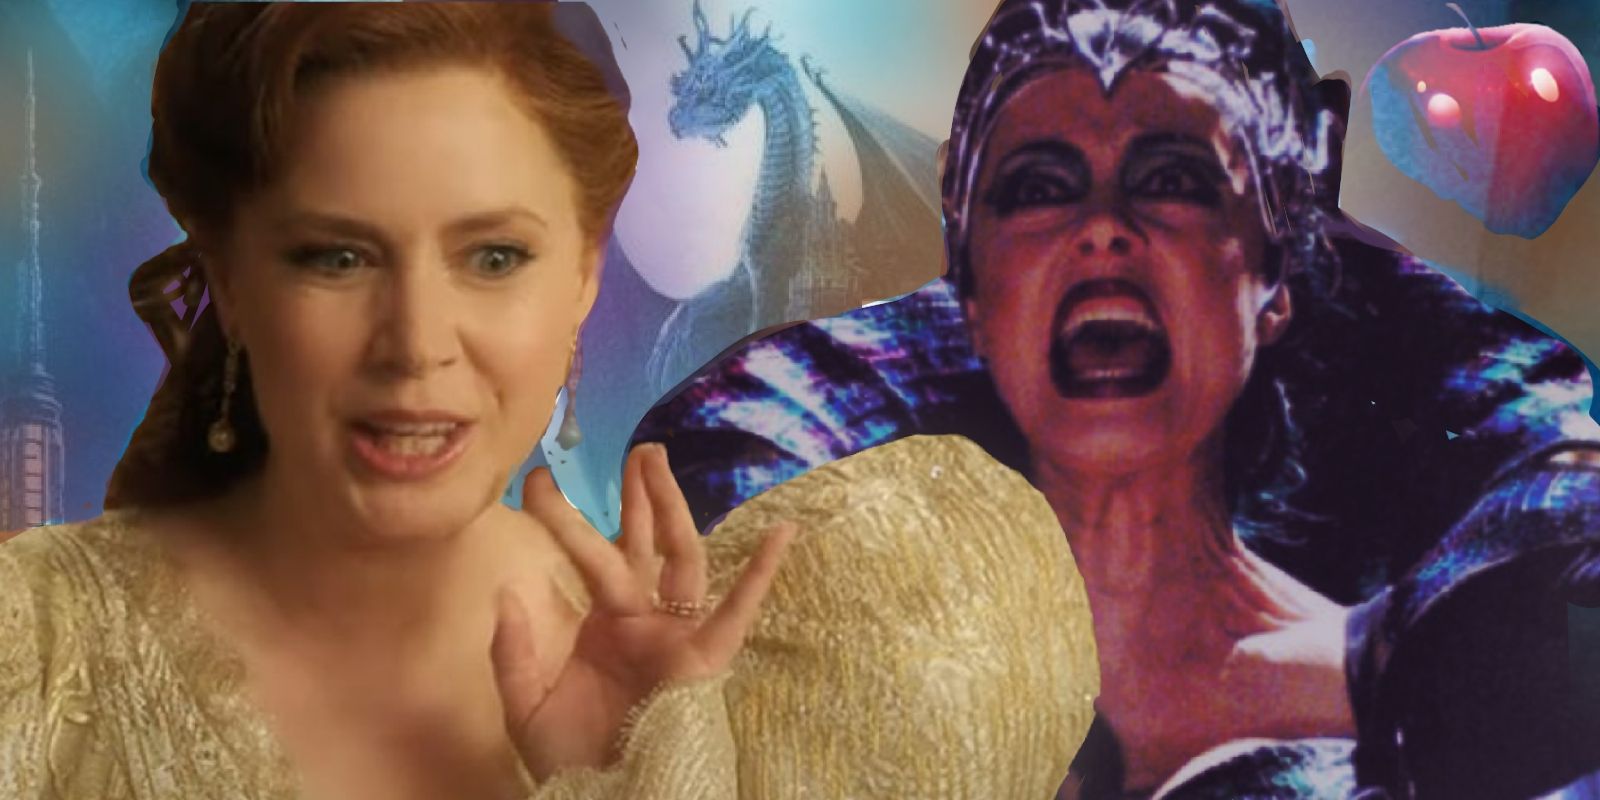 Gisele and the Evil Stepmother from Enchanted with a dragon behind them